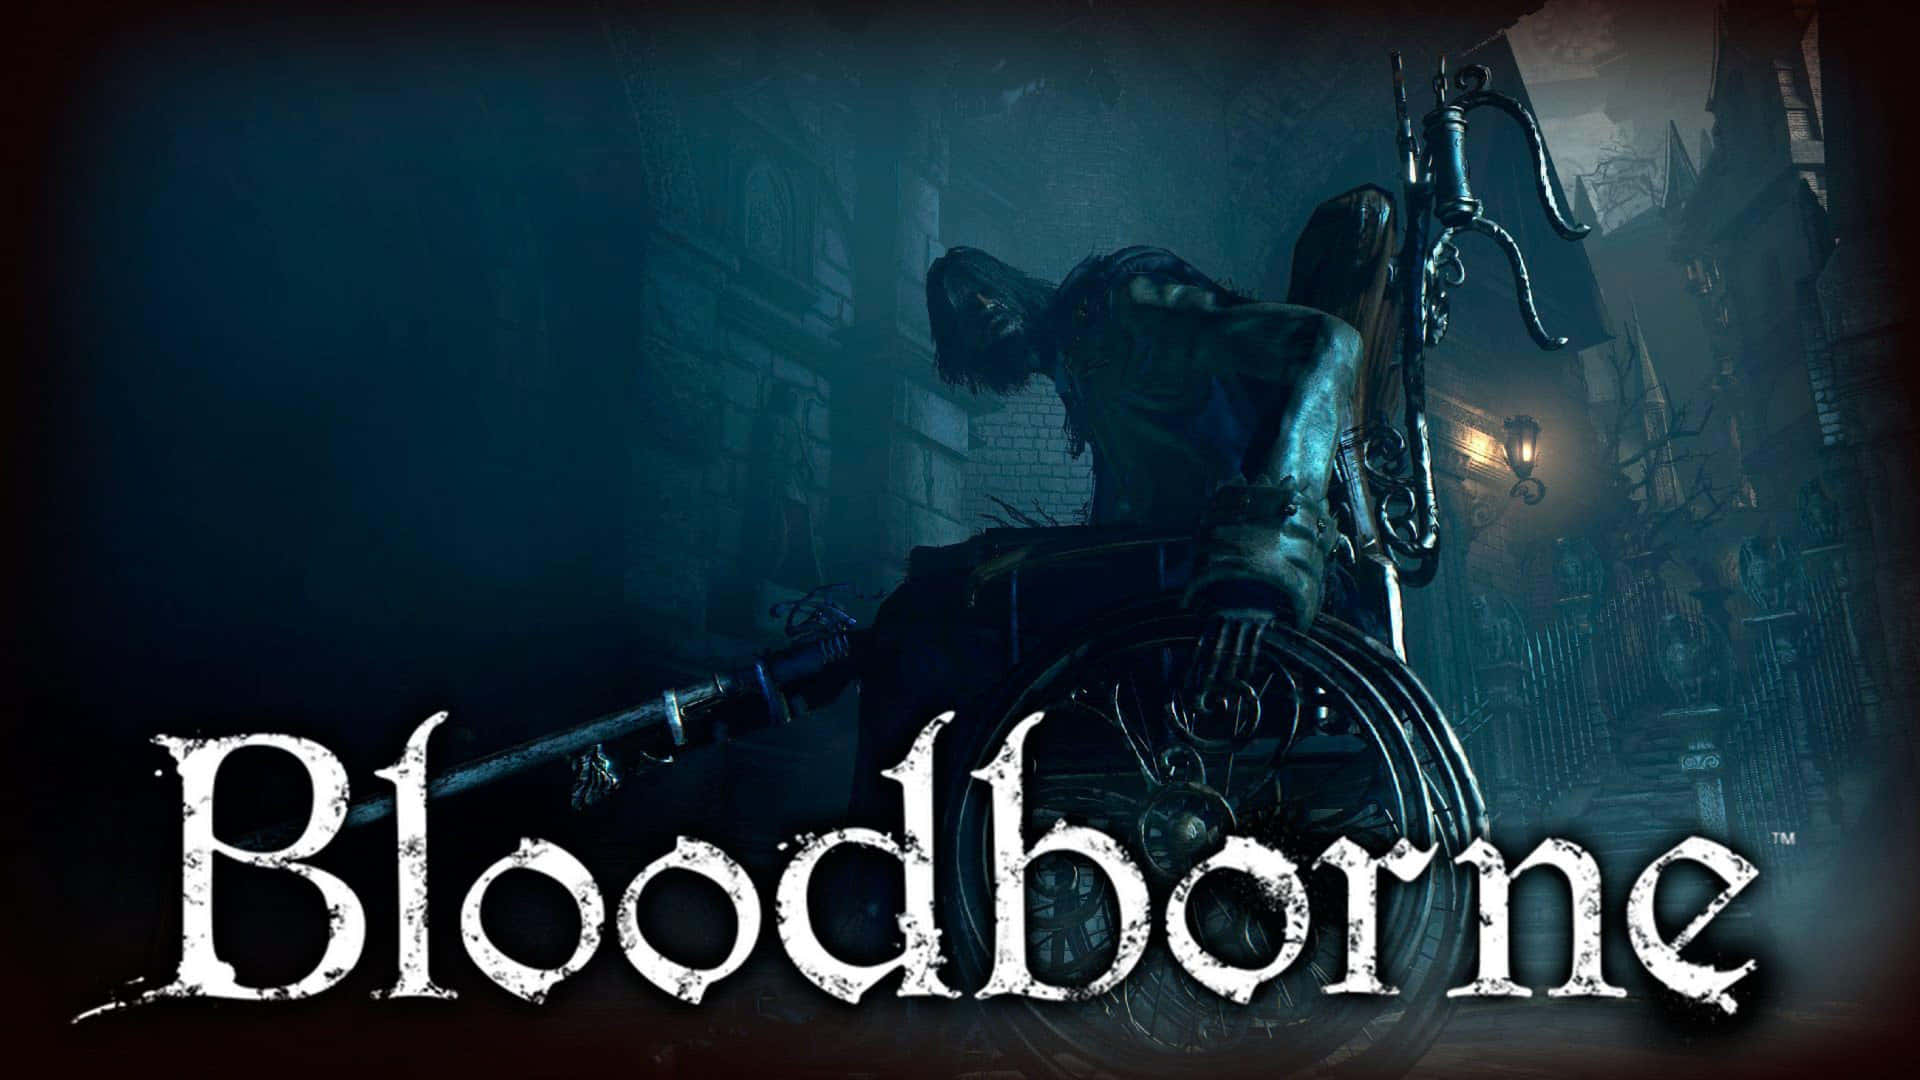 Hunter exploring the mysterious world of Bloodborne